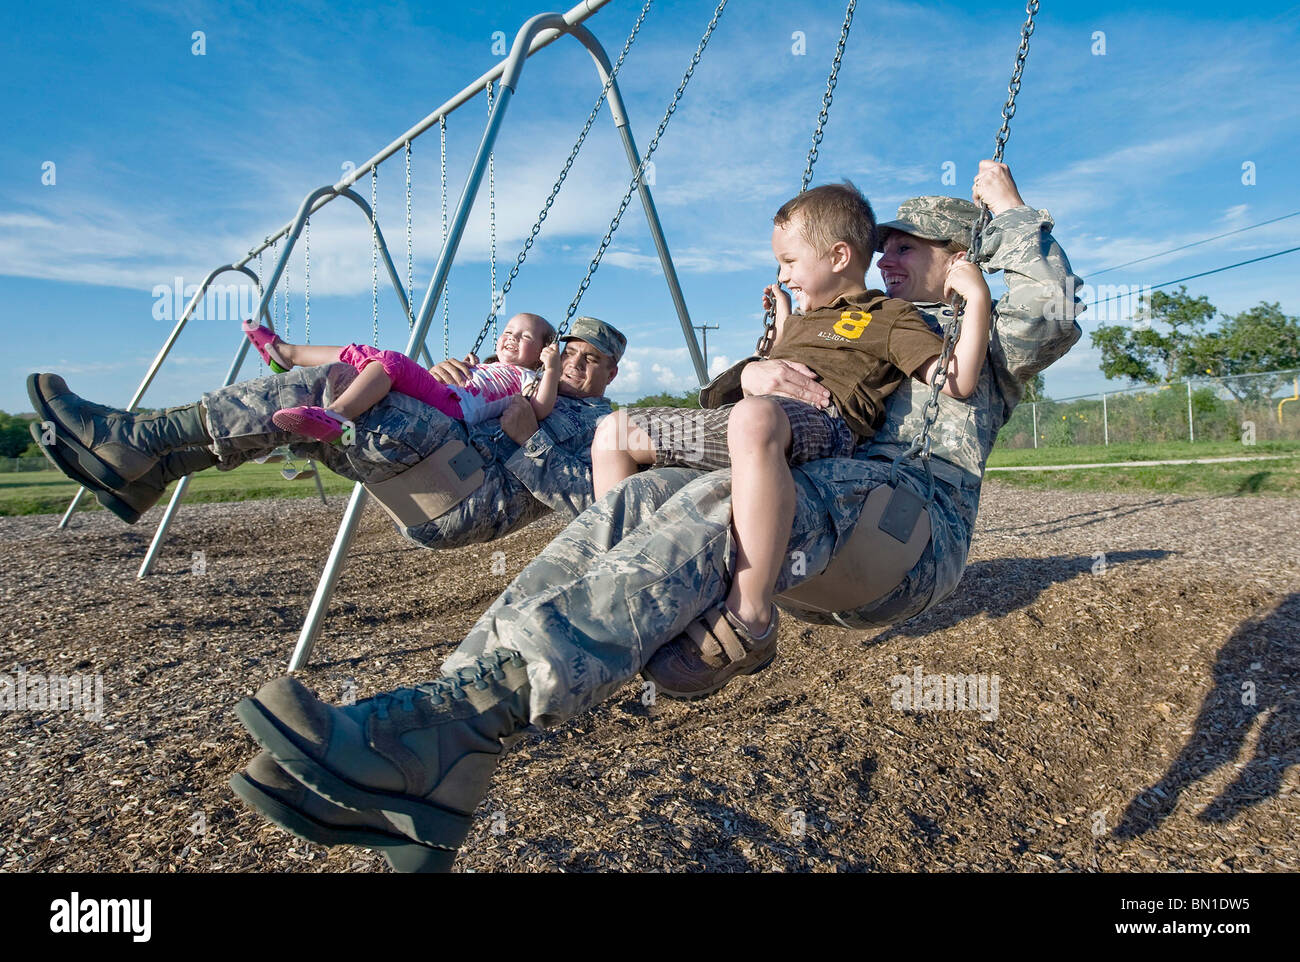 Master Sgt. Roldolfo Gamez and his wife, Tech. Sgt. Christina Gamez, swing with their children at their neighborhood park Stock Photo